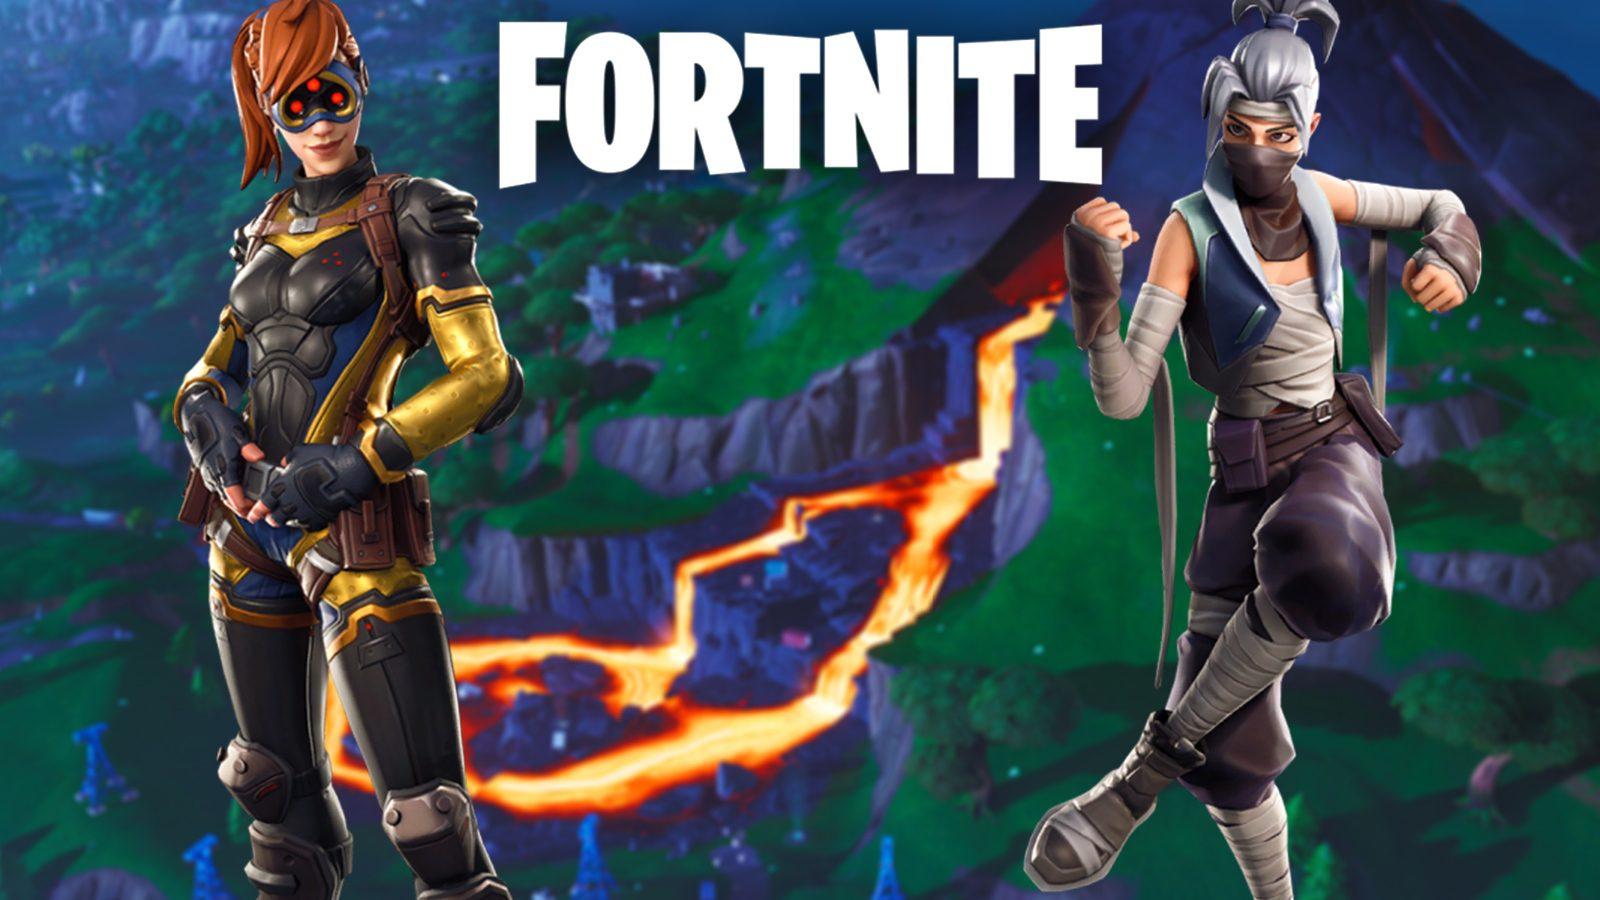 Leaked Fortnite skins and cosmetics found in v8.1 patch. Dexerto